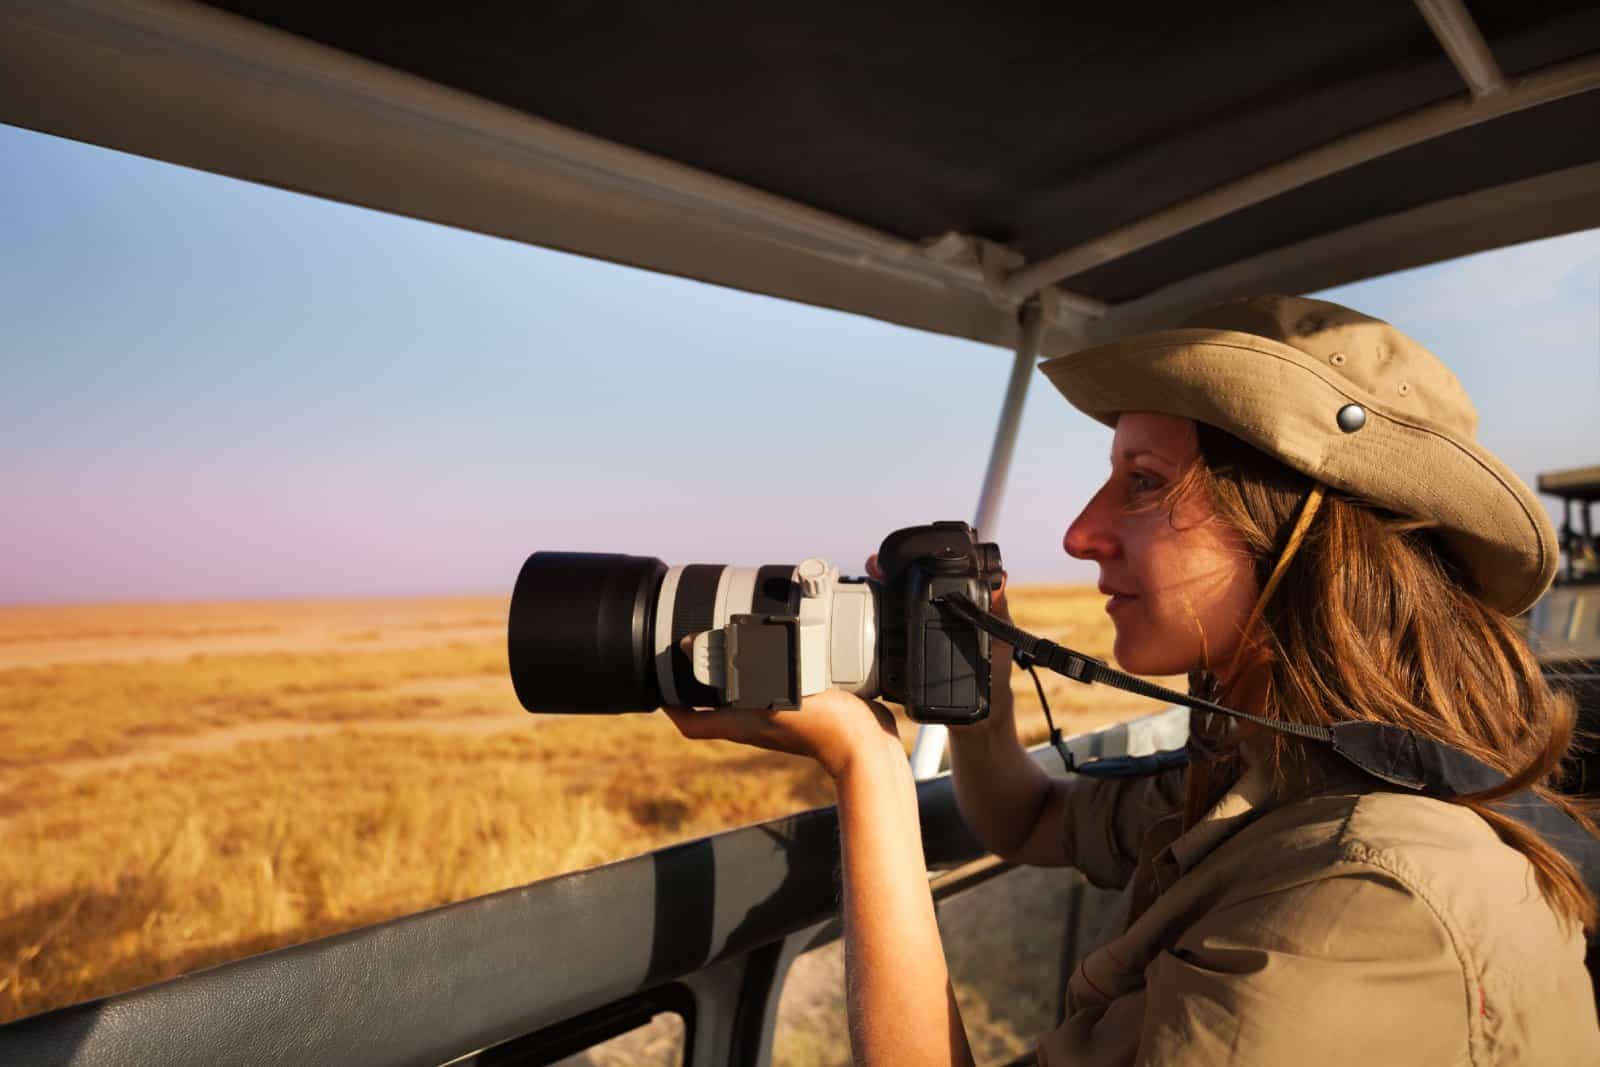 <p><span>Photography workshops in the Serengeti cater to both amateur and professional photographers. Under the guidance of experienced professionals, these workshops focus on capturing the essence of the Serengeti through the lens.</span></p> <p><span>They provide practical tips on wildlife photography, from mastering light and composition to understanding animal behavior for the perfect shot. These workshops enhance your photography skills and deepen your appreciation of the Serengeti’s landscapes and inhabitants.</span></p> <p><b>Insider’s Tip: </b><span>Ensure you have extra memory cards and batteries. </span></p> <p><b>When to Travel: </b><span>Year-round, though the dry season offers better light and visibility. </span></p> <p><b>How to Get There: </b><span>Workshops are typically arranged by lodges or tour companies in the Serengeti.</span></p>